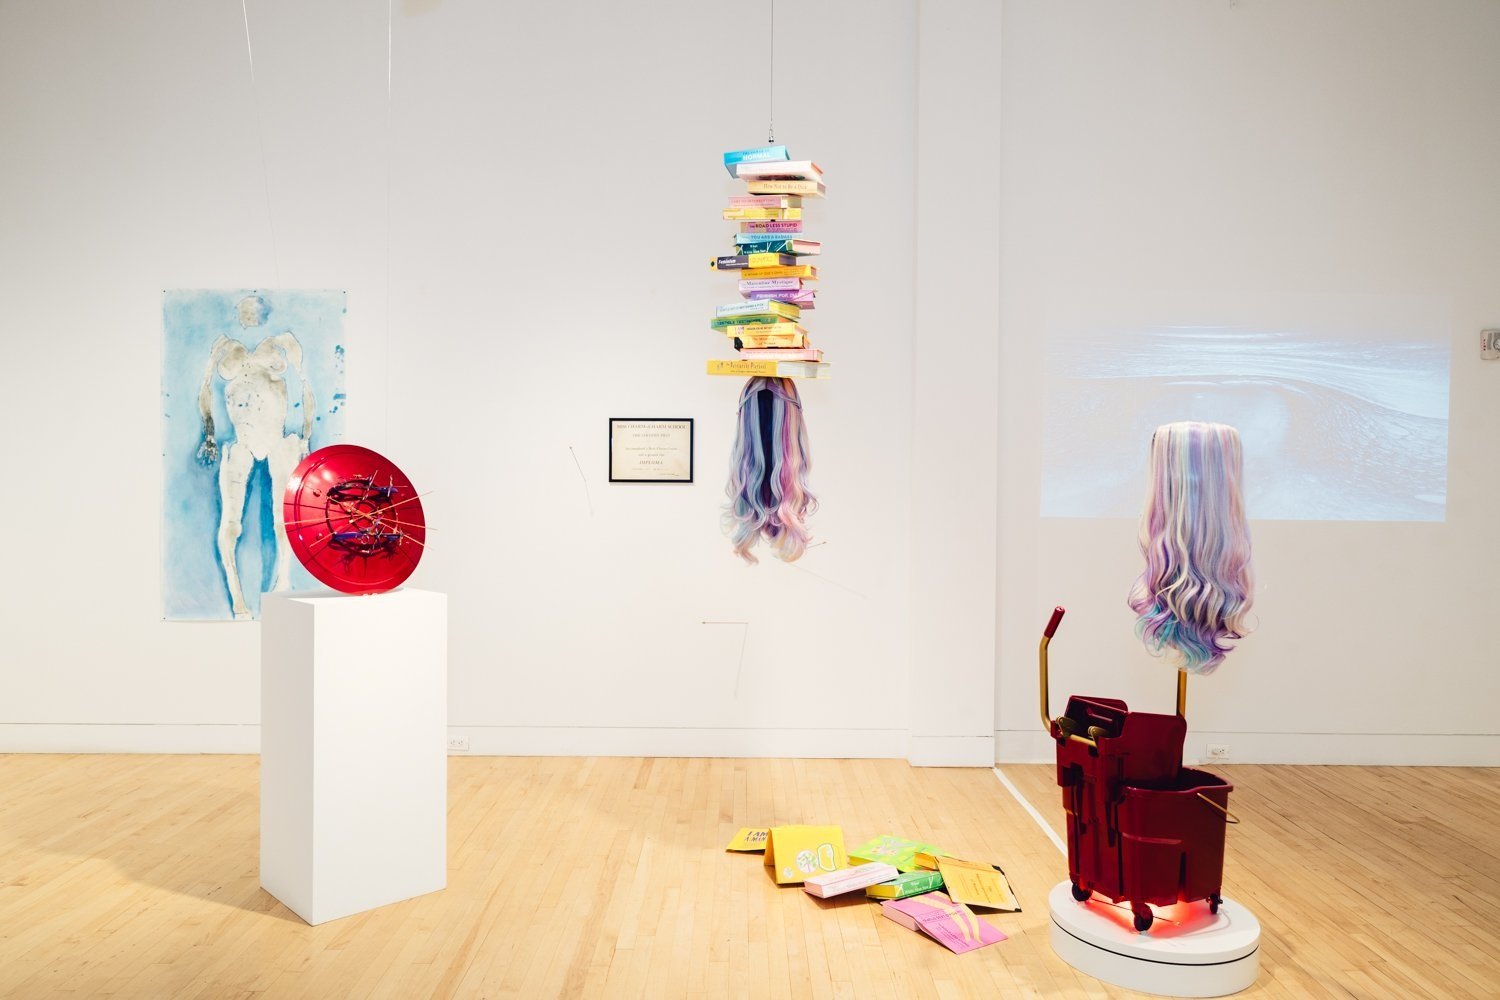 Installation view, "New Ways of Doing Things"